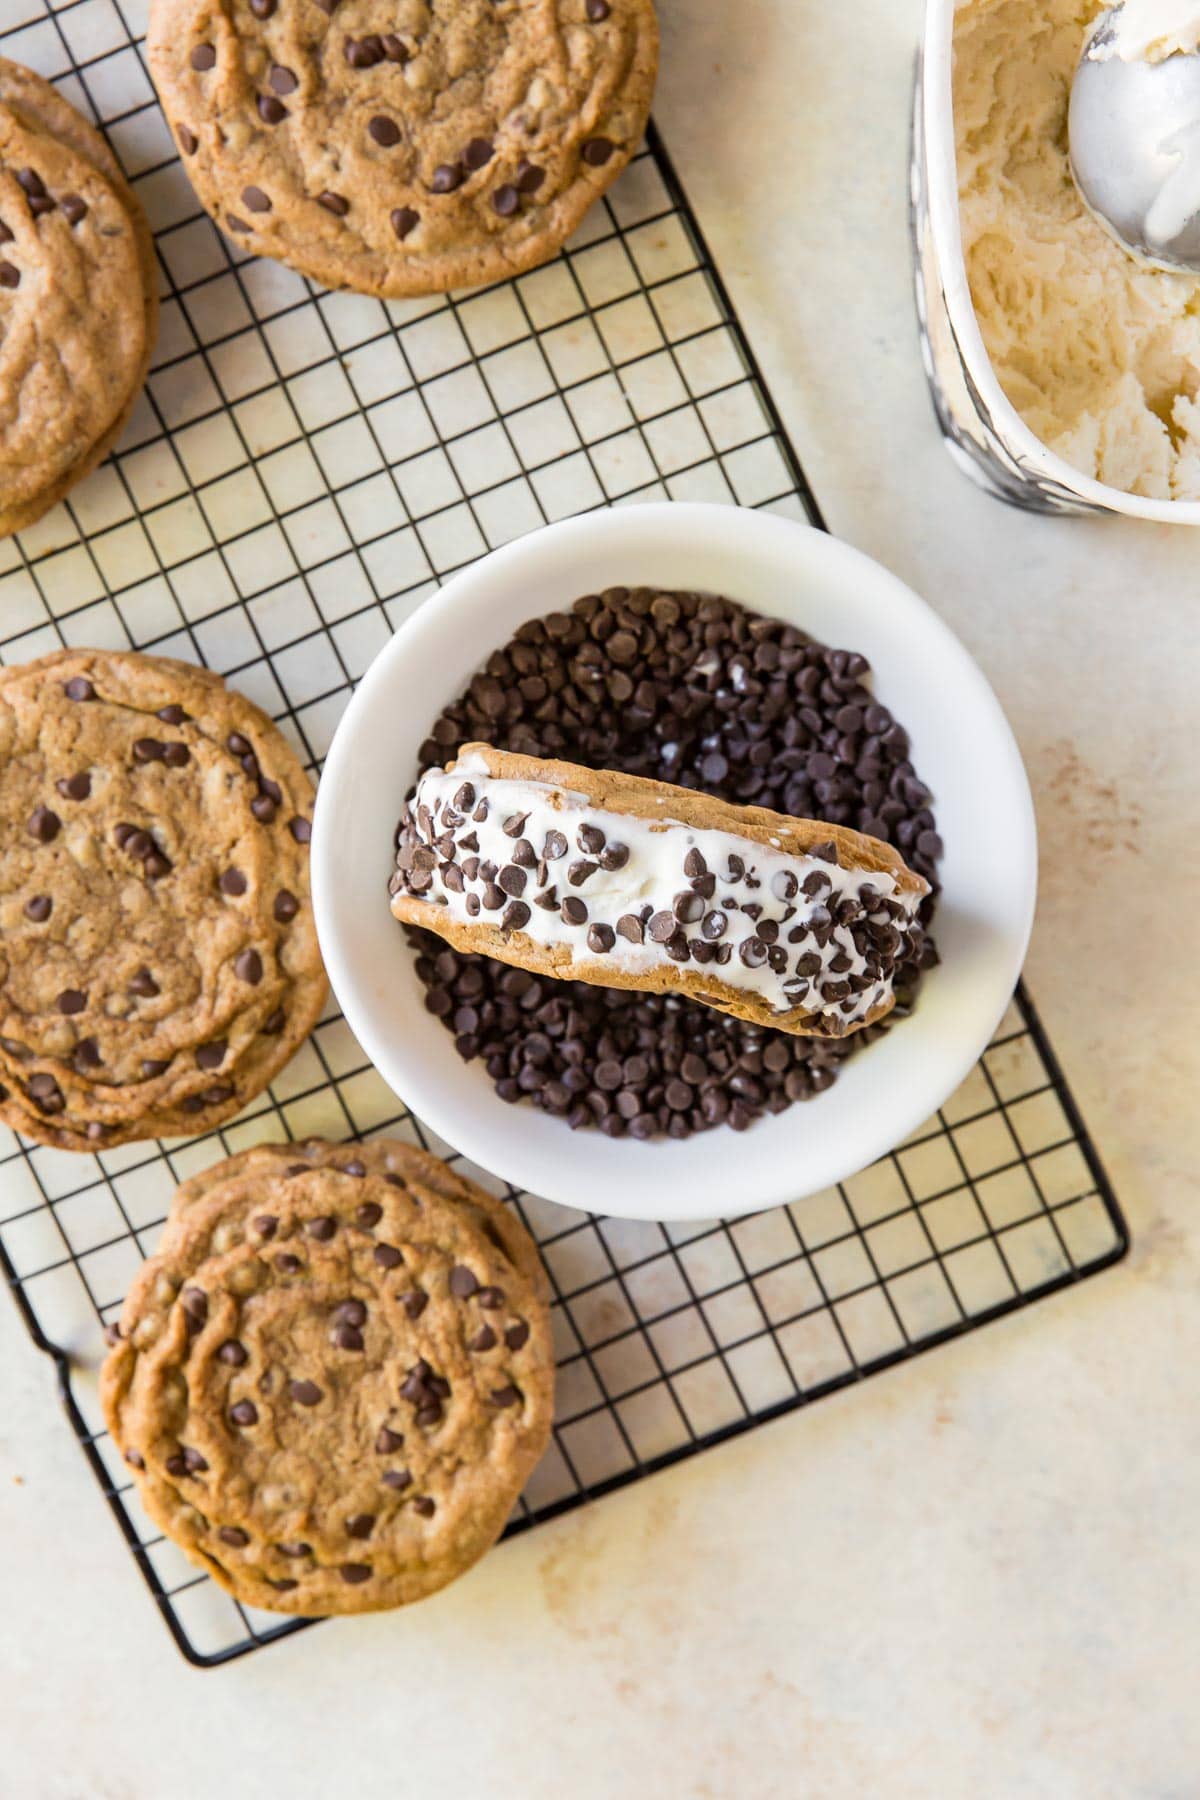 chocolate chip cookie ice cream sandwich on its side in a bowl of mini chocolate chips